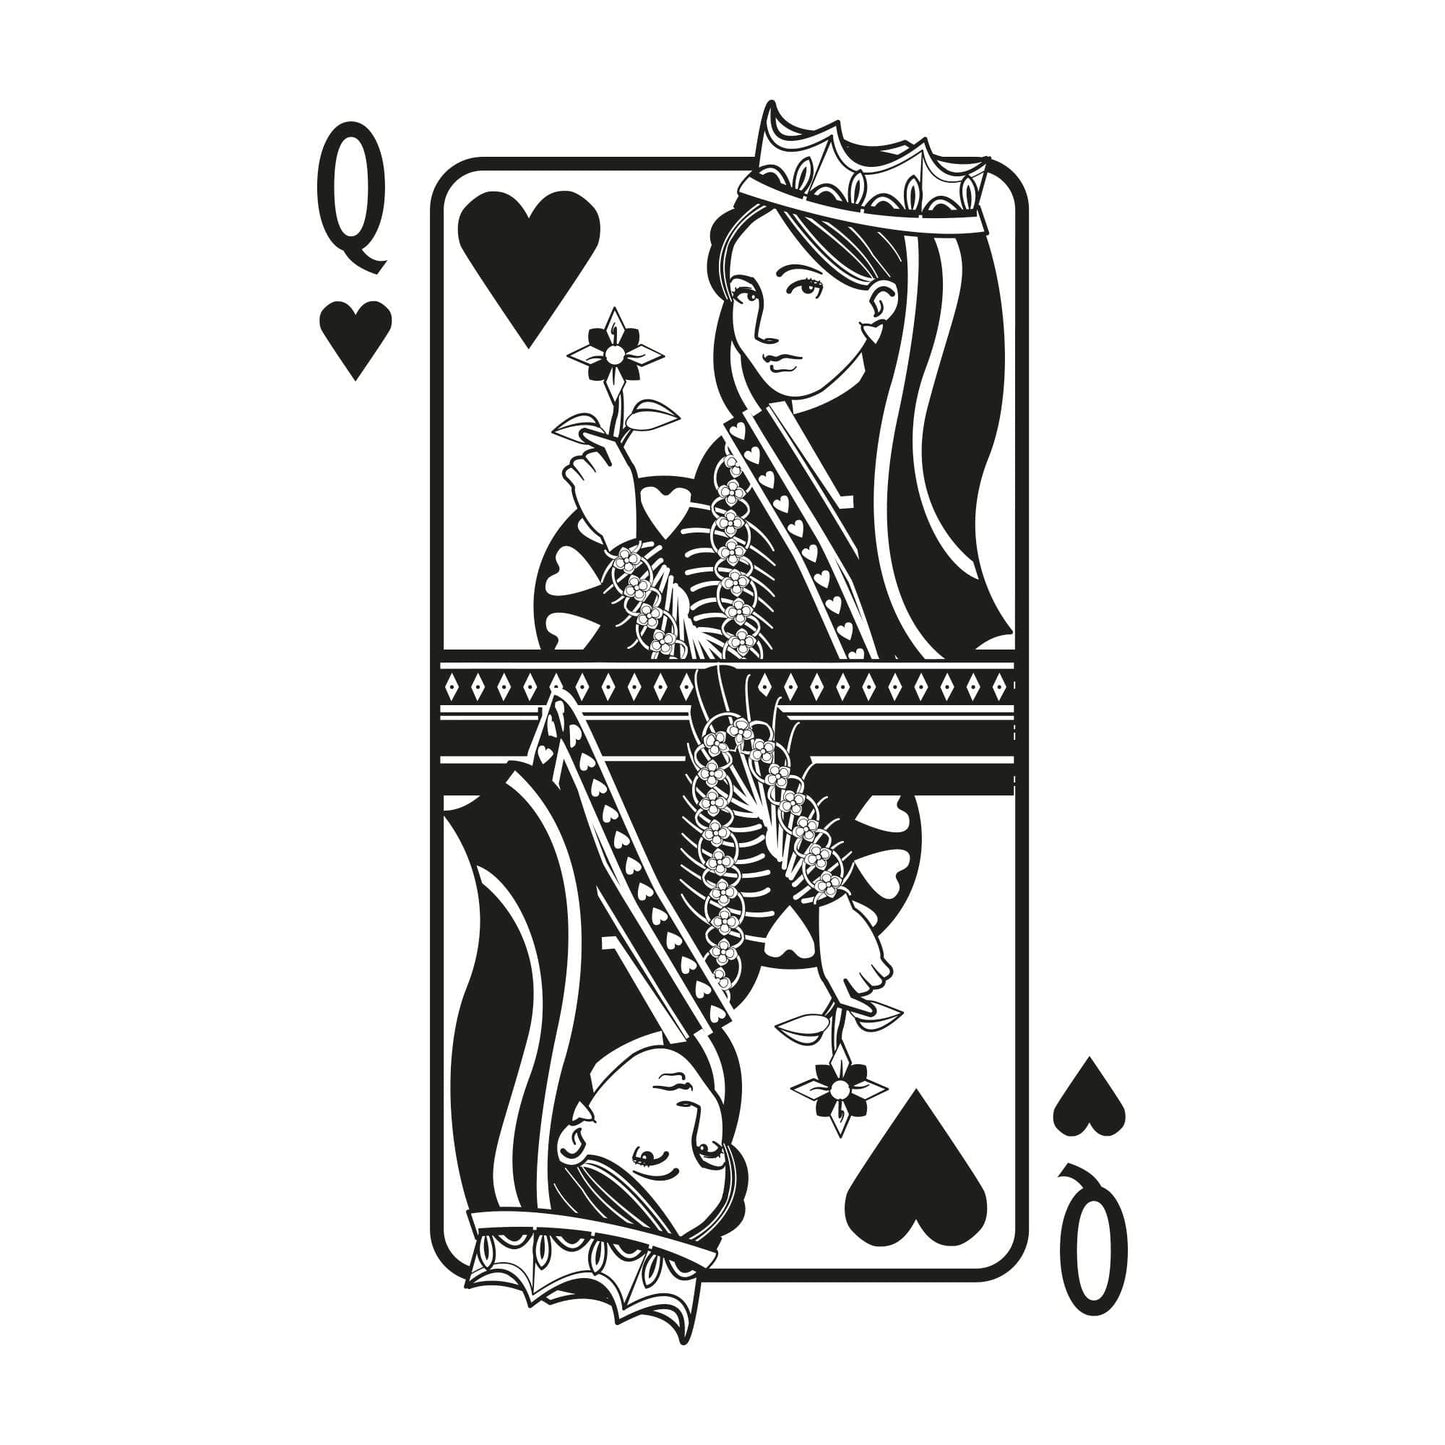 Queen of Hearts Playing Cards Wall Decal Sticker. #OS_DC360 – StickerBrand